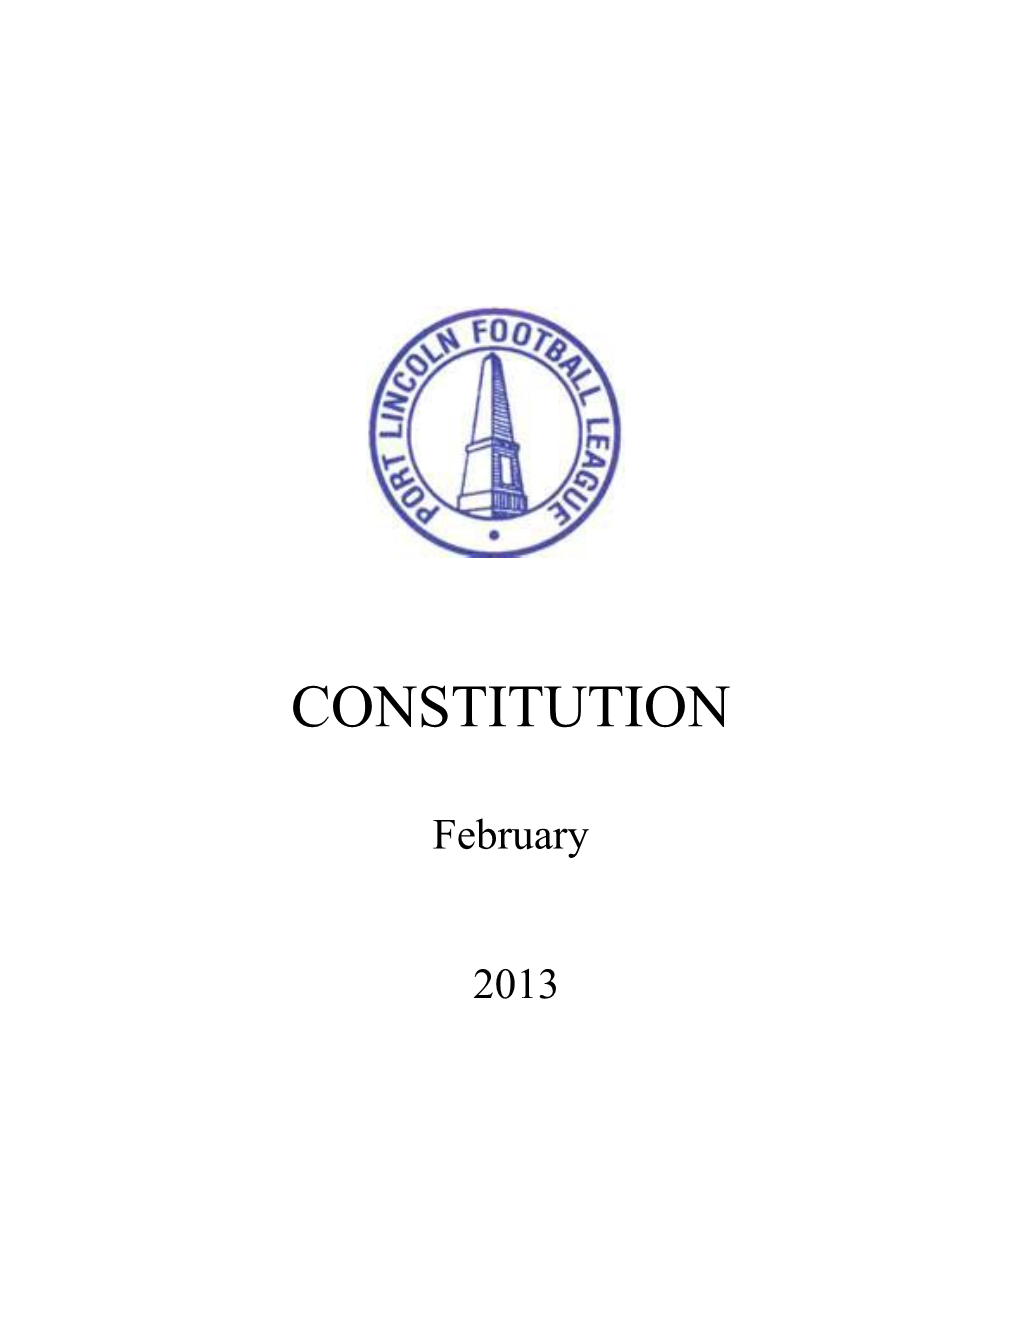 Port Lincoln Football League Incorperated Constitution